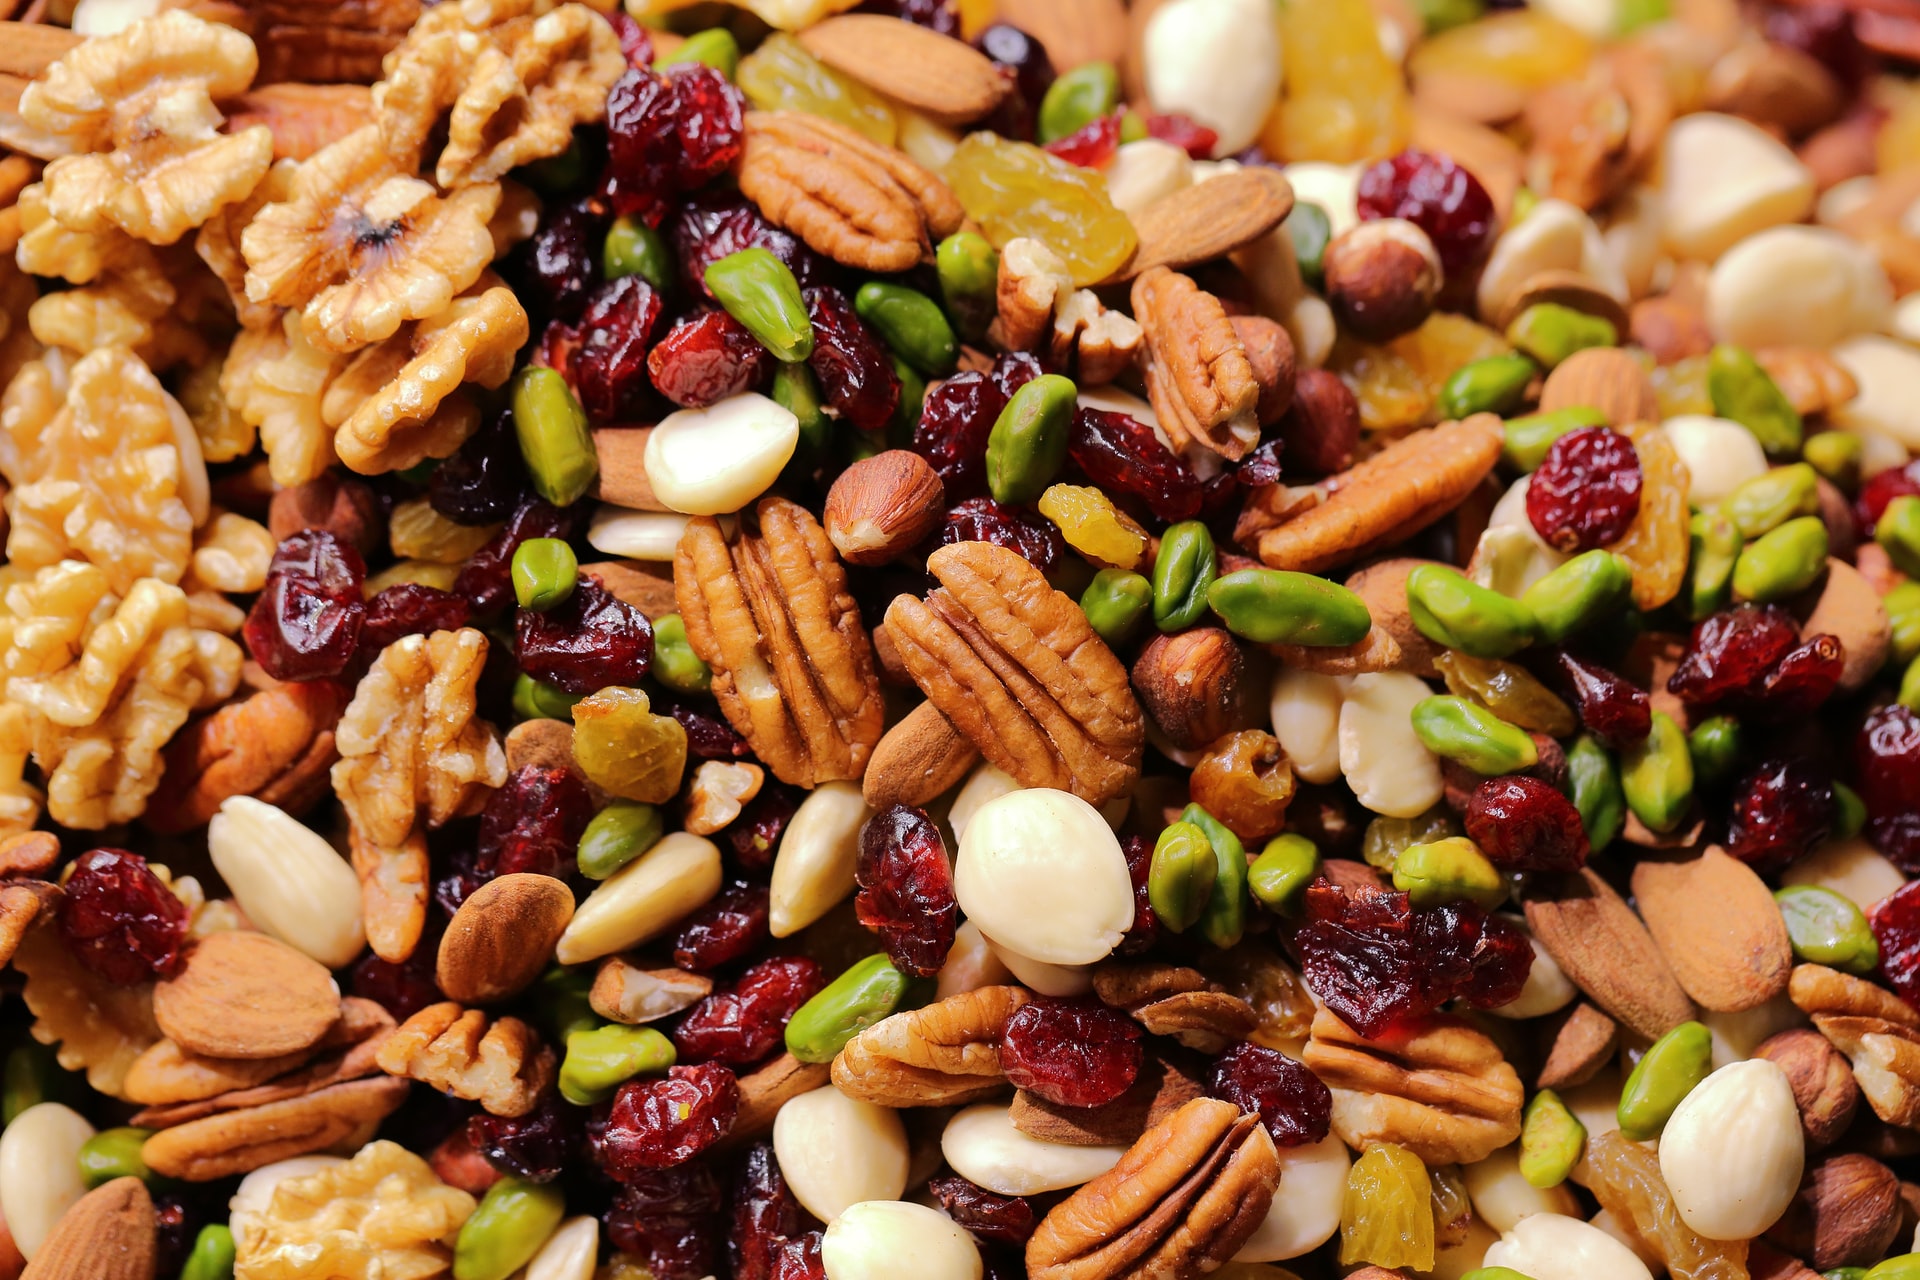 Nuts and seeds – why eat them?